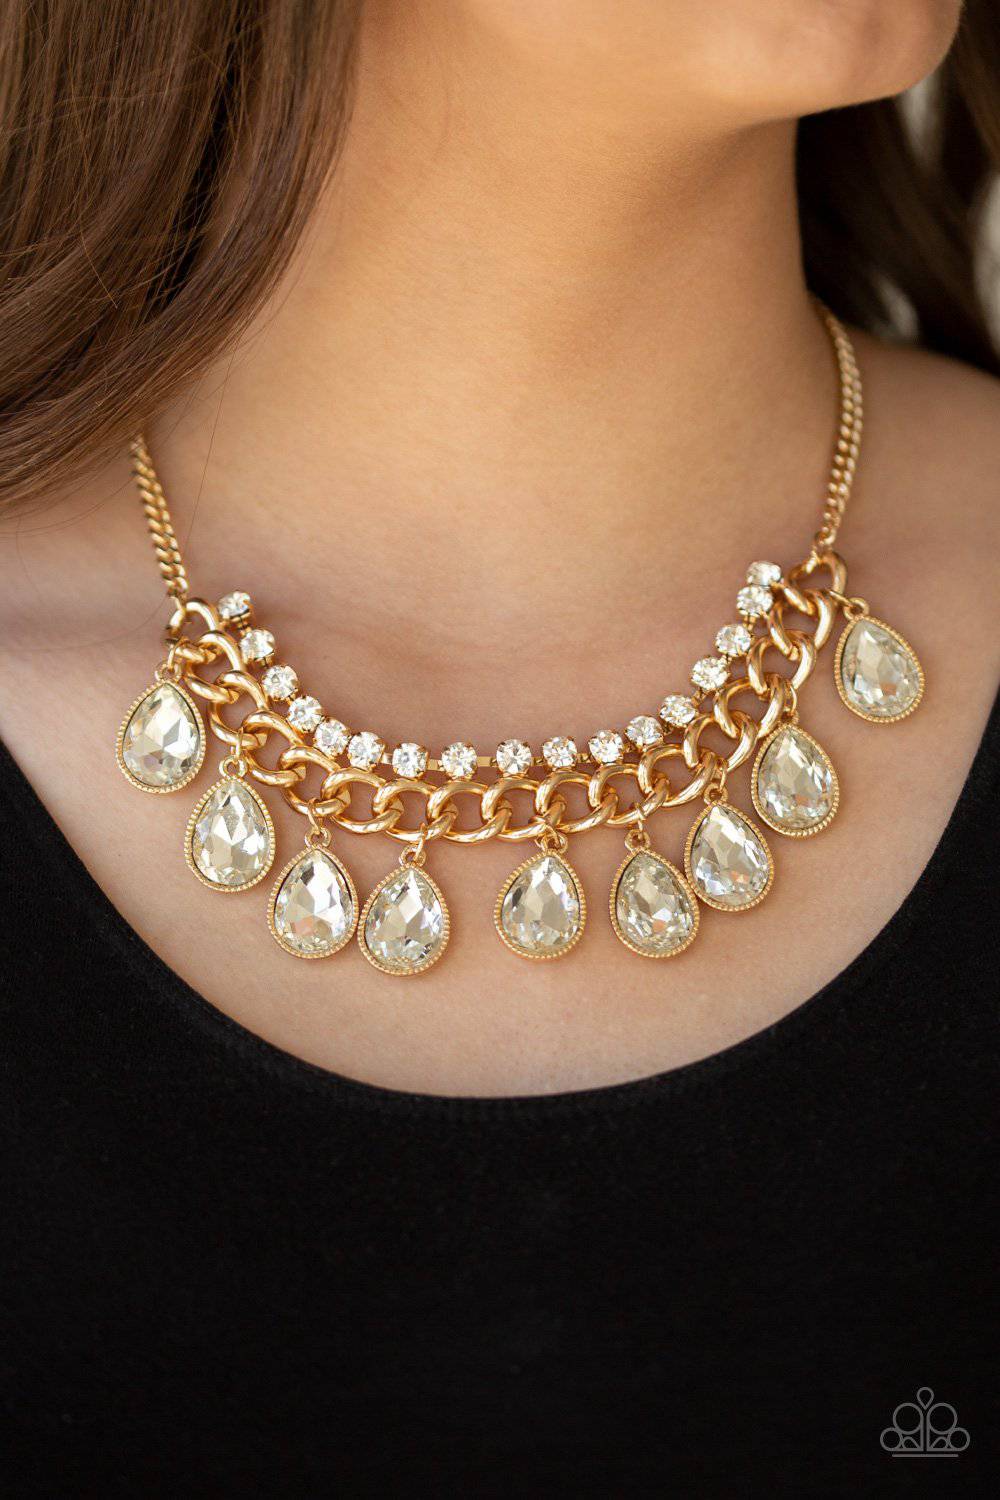 All Toget-HEIR Now - Gold Rhinestone Necklace - Paparazzi Accessories - GlaMarous Titi Jewels